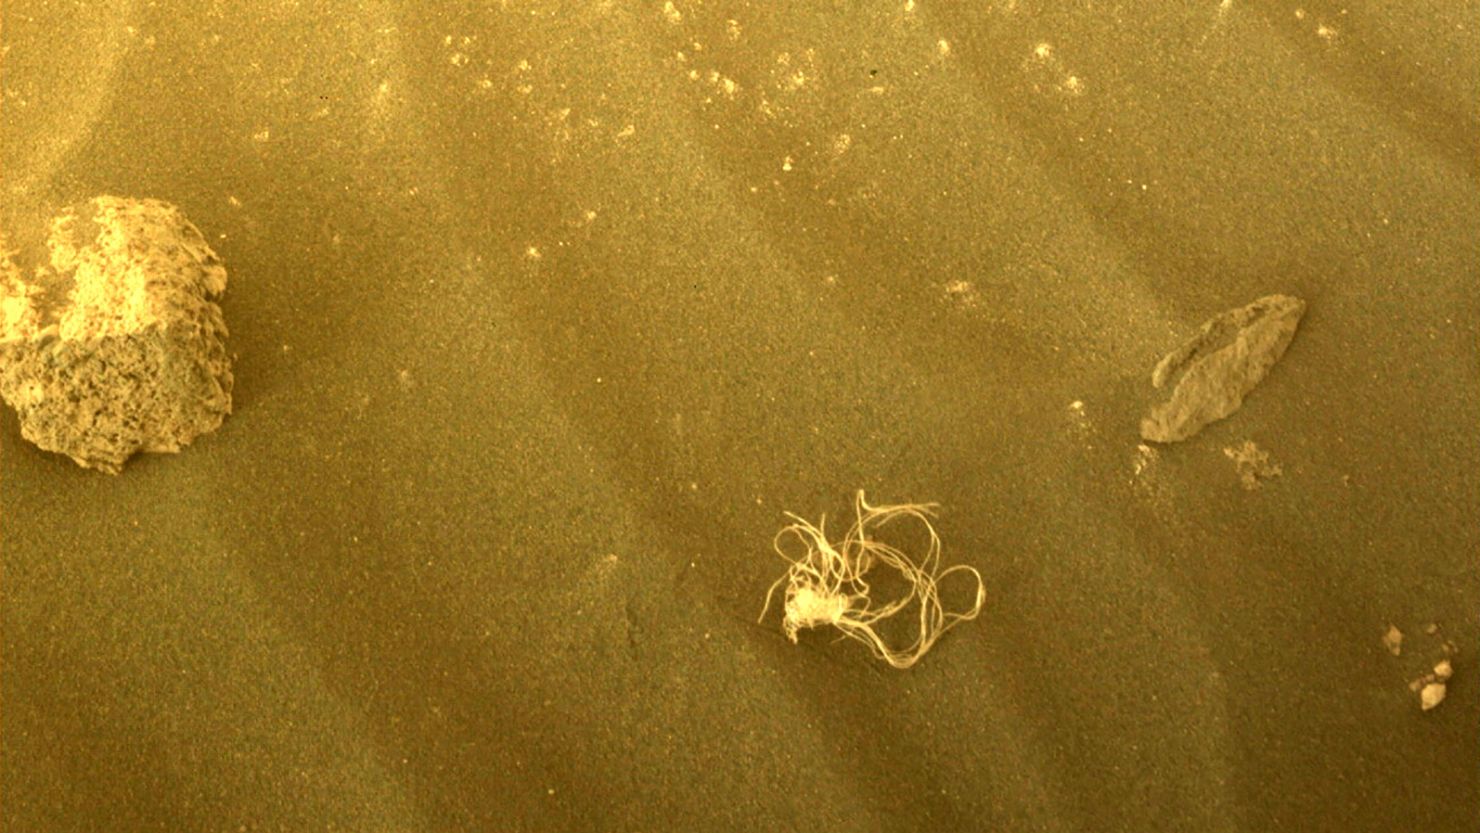 NASA's Perseverance rover captured a photo of a small bundle of string while exploring Jezero Crater. 